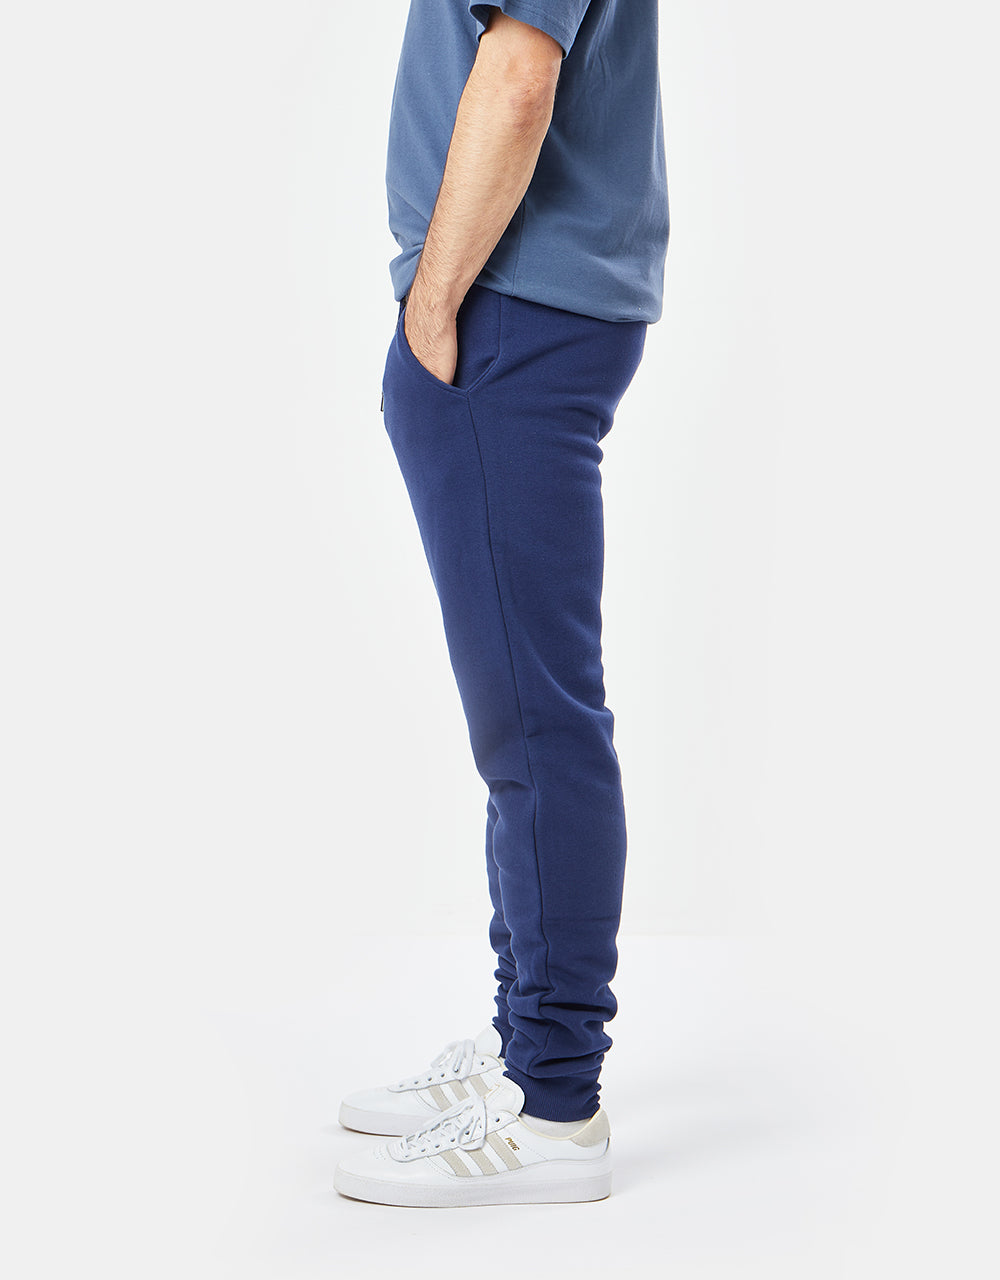 Route One Essential Sweatpant - Navy